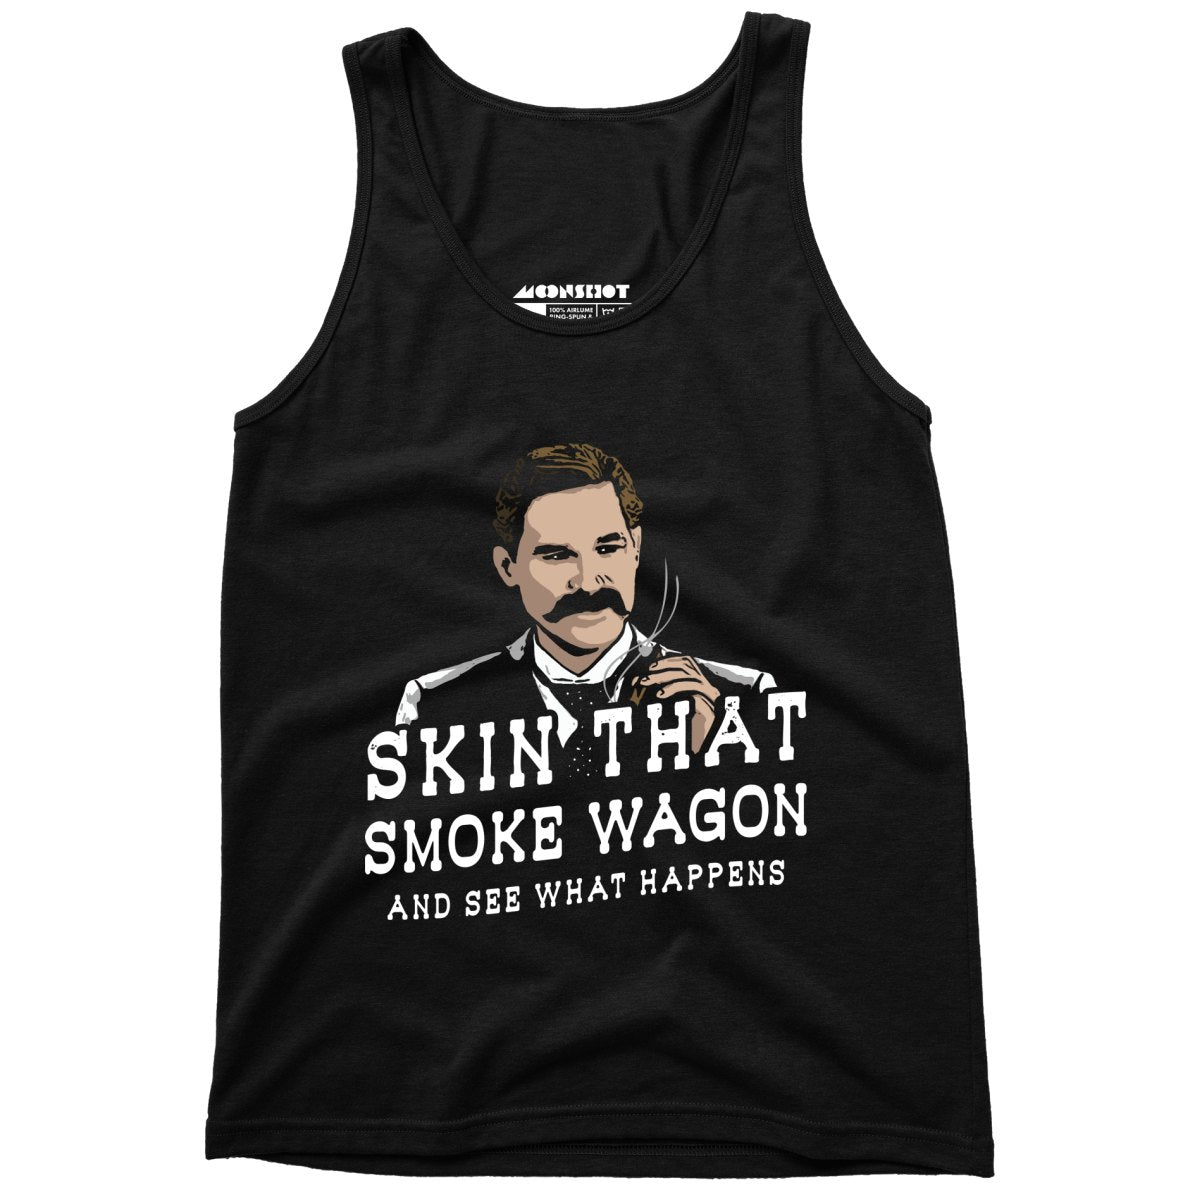 Skin That Smoke Wagon and See What Happens - Unisex Tank Top